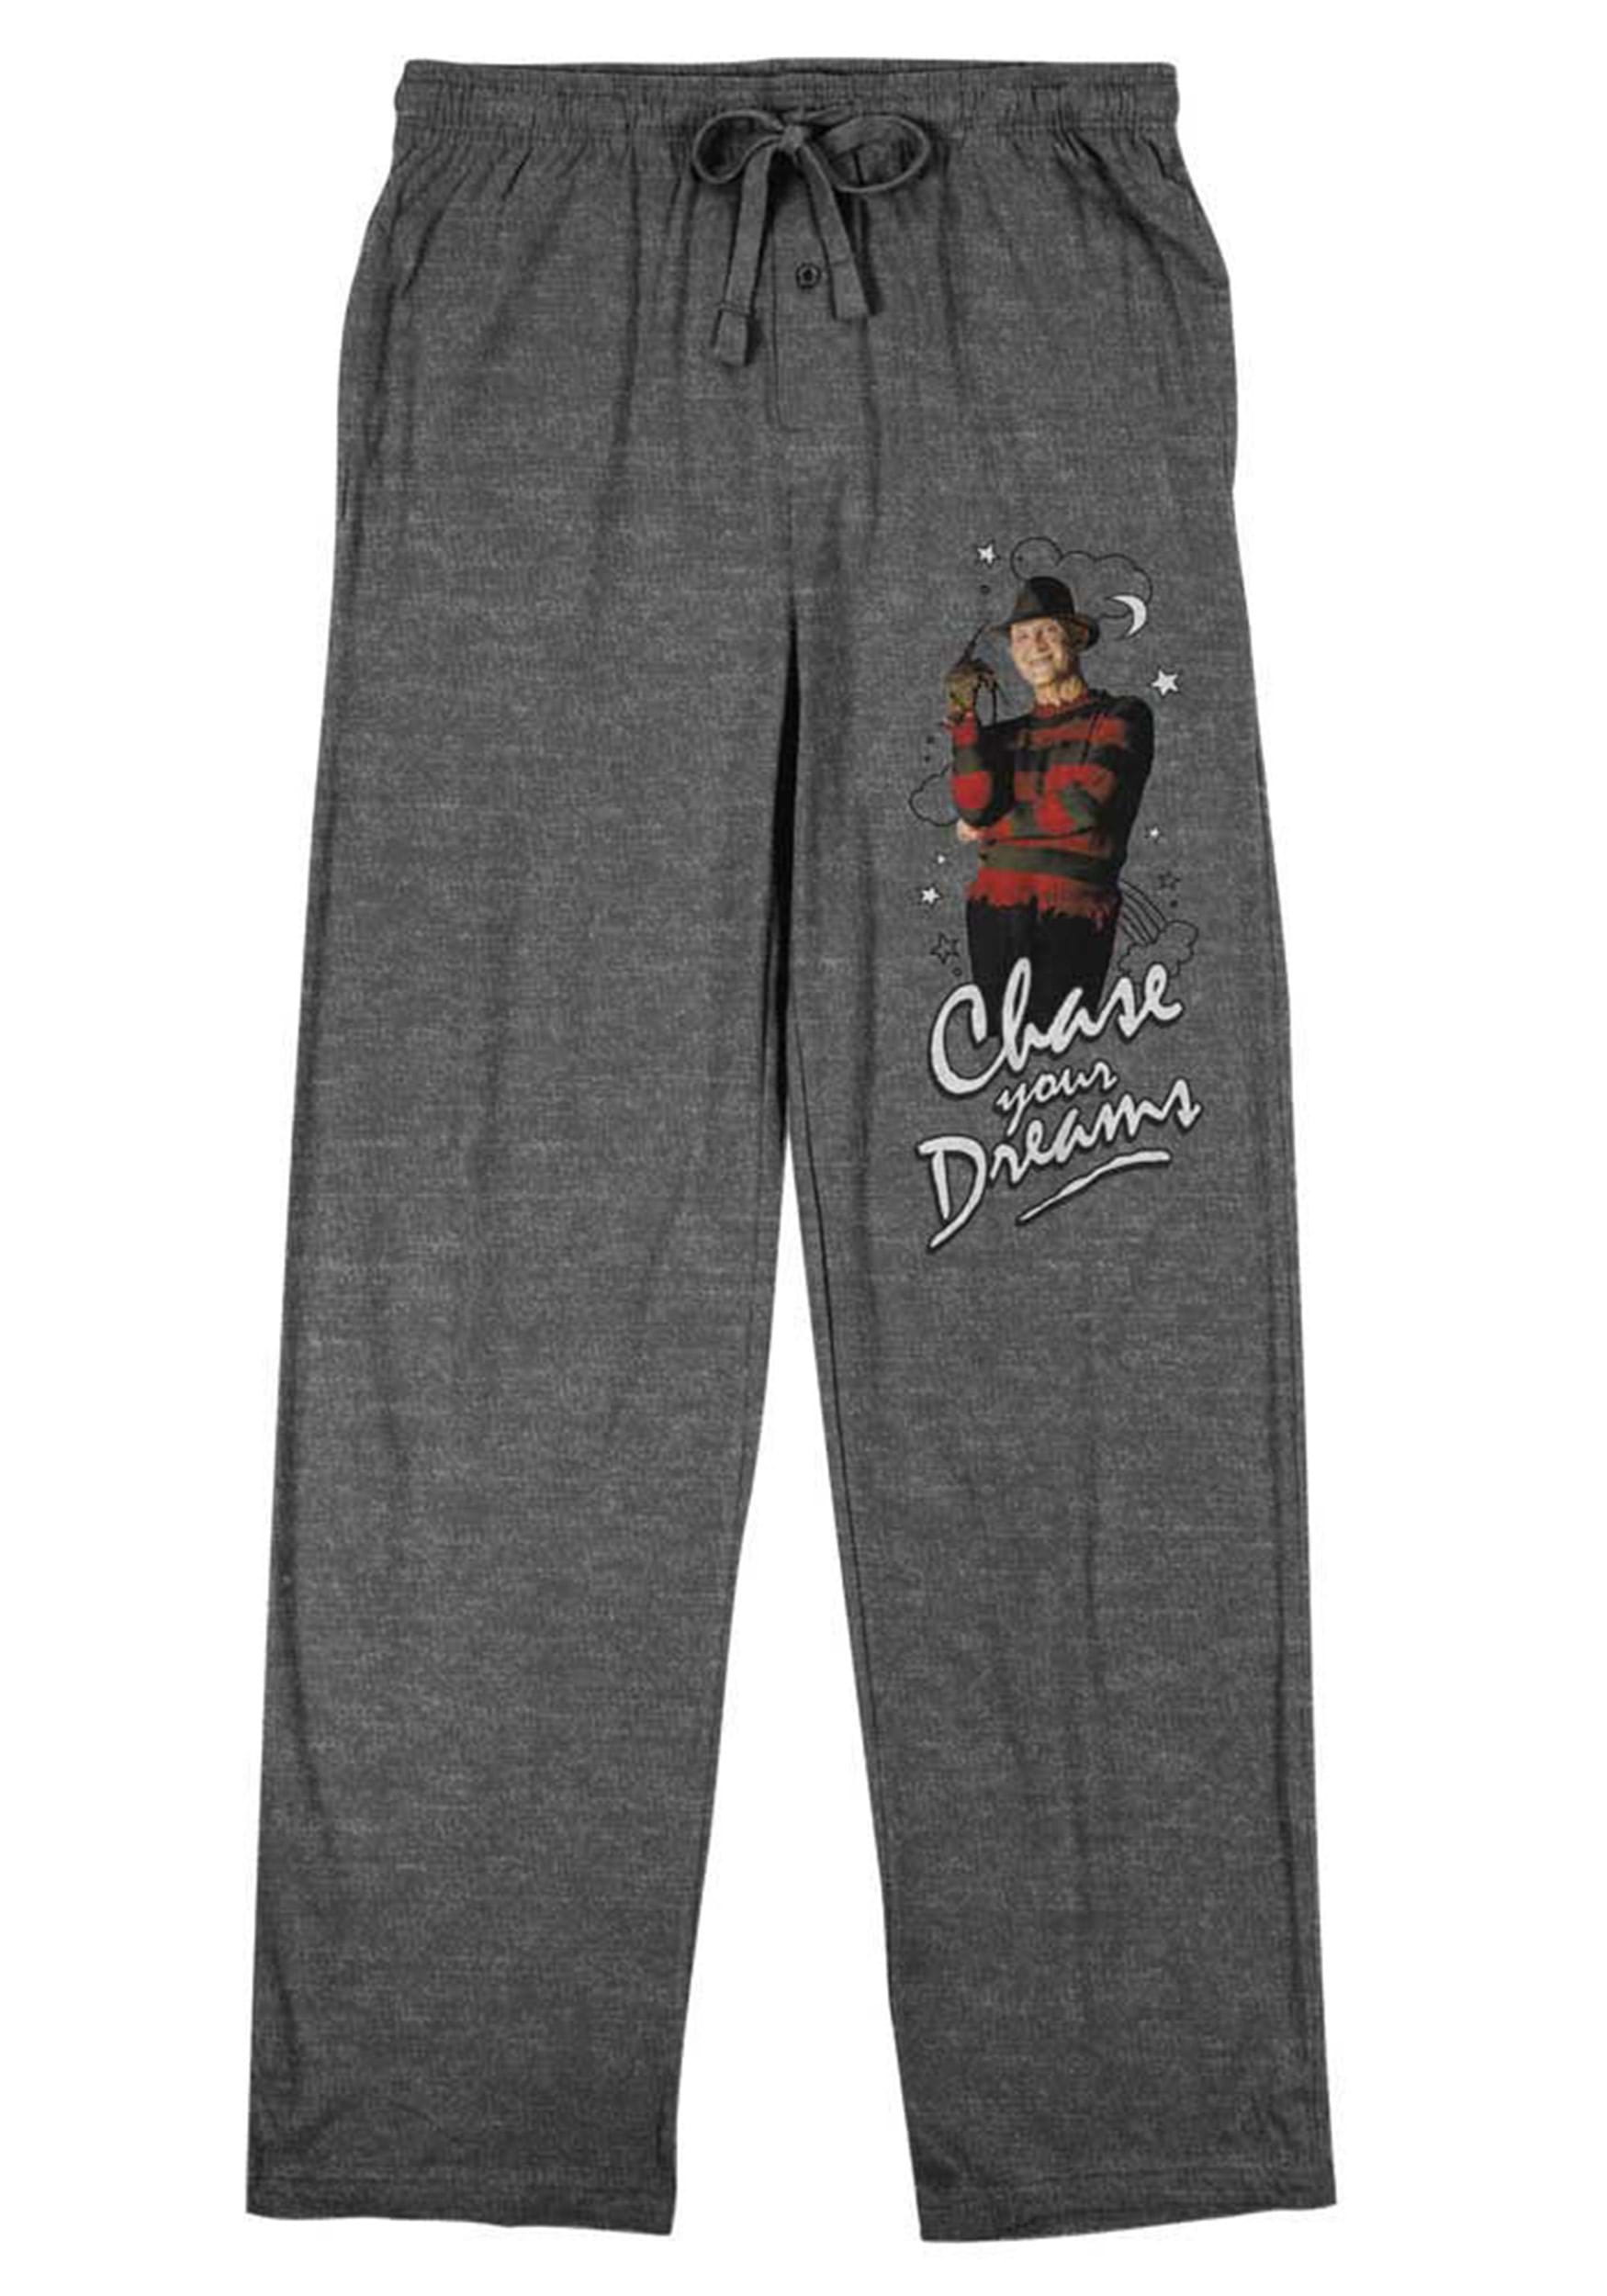 Nightmare On Elm Street Chase Your Dreams Sleep Pants for Adults